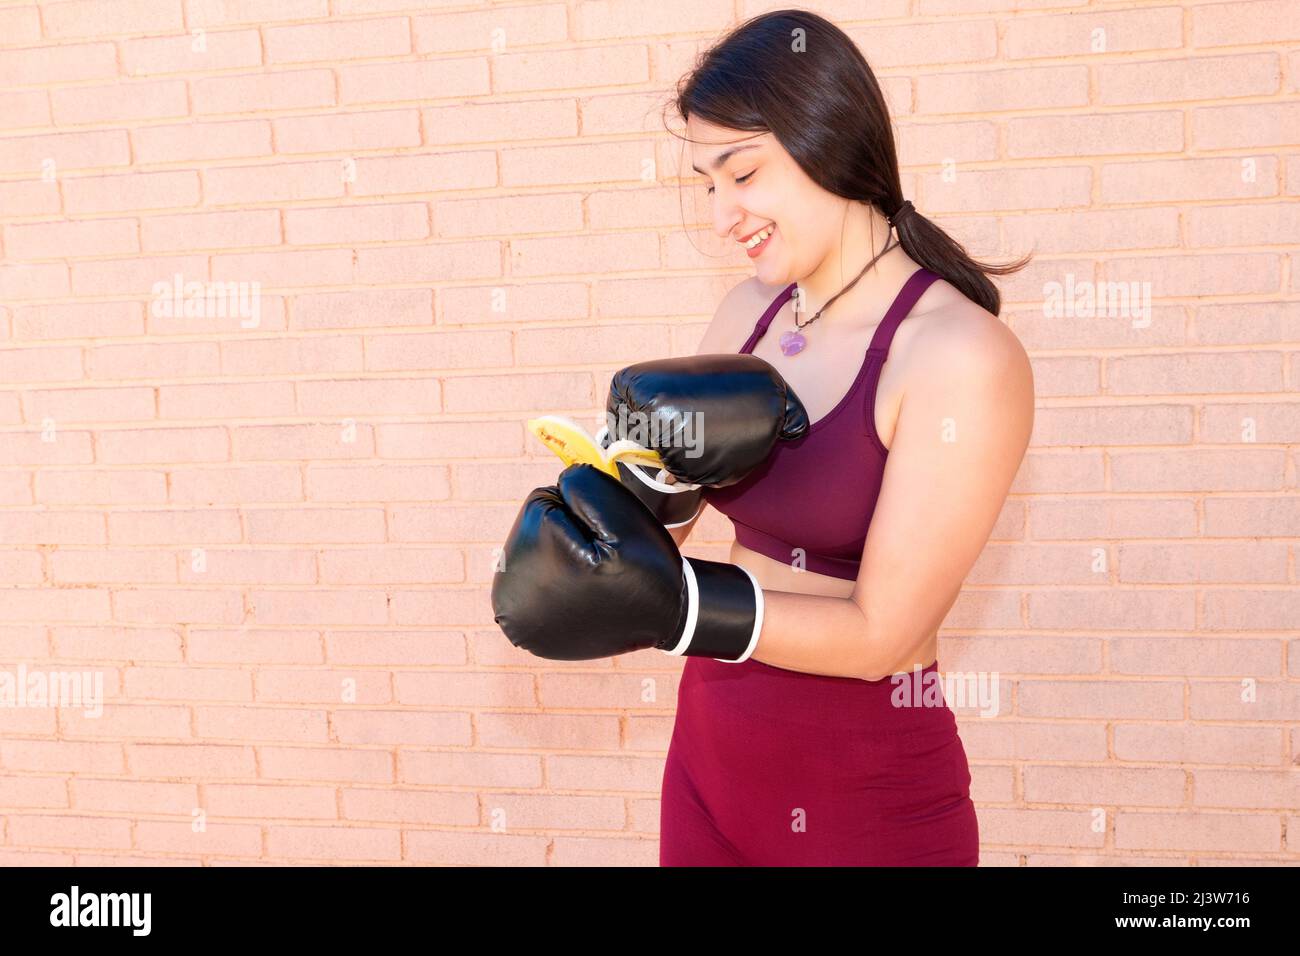 A young Caucasian woman is wearing black boxing gloves and has managed to peel a banana. In the background is a brick wall. Stock Photo